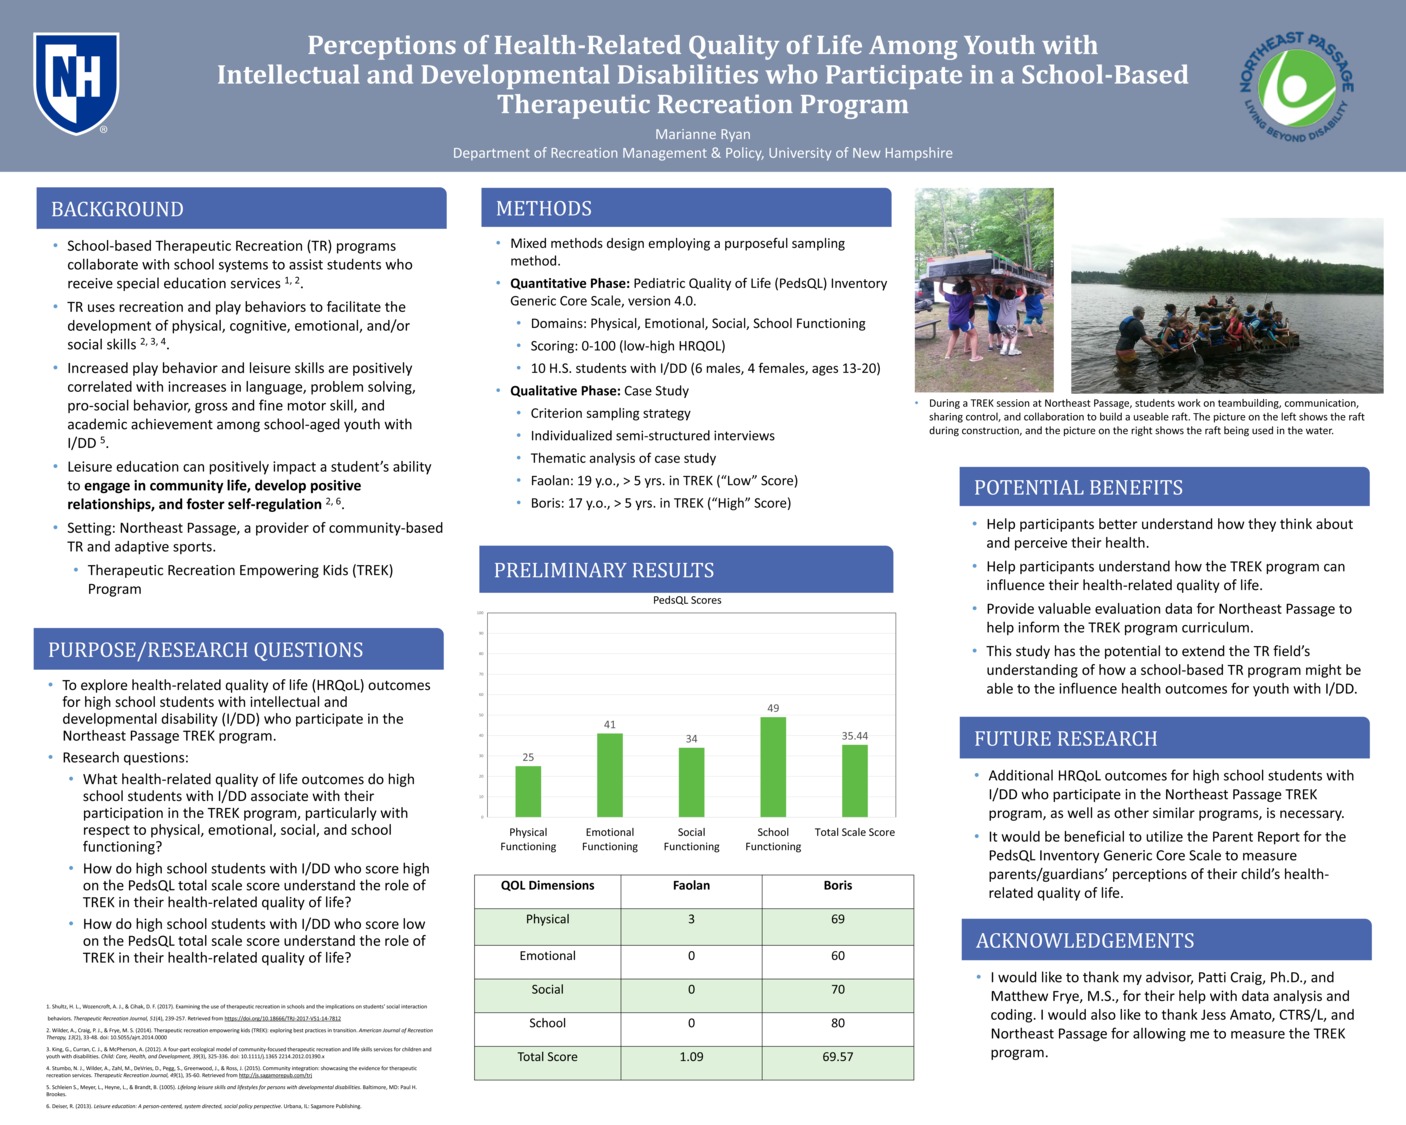 Perceptions Of Health-Related Quality Of Life Among Youth With Intellectual And Developmental Disabilities Who Participate In A School-Based Therapeutic Recreation Program by mfr1003